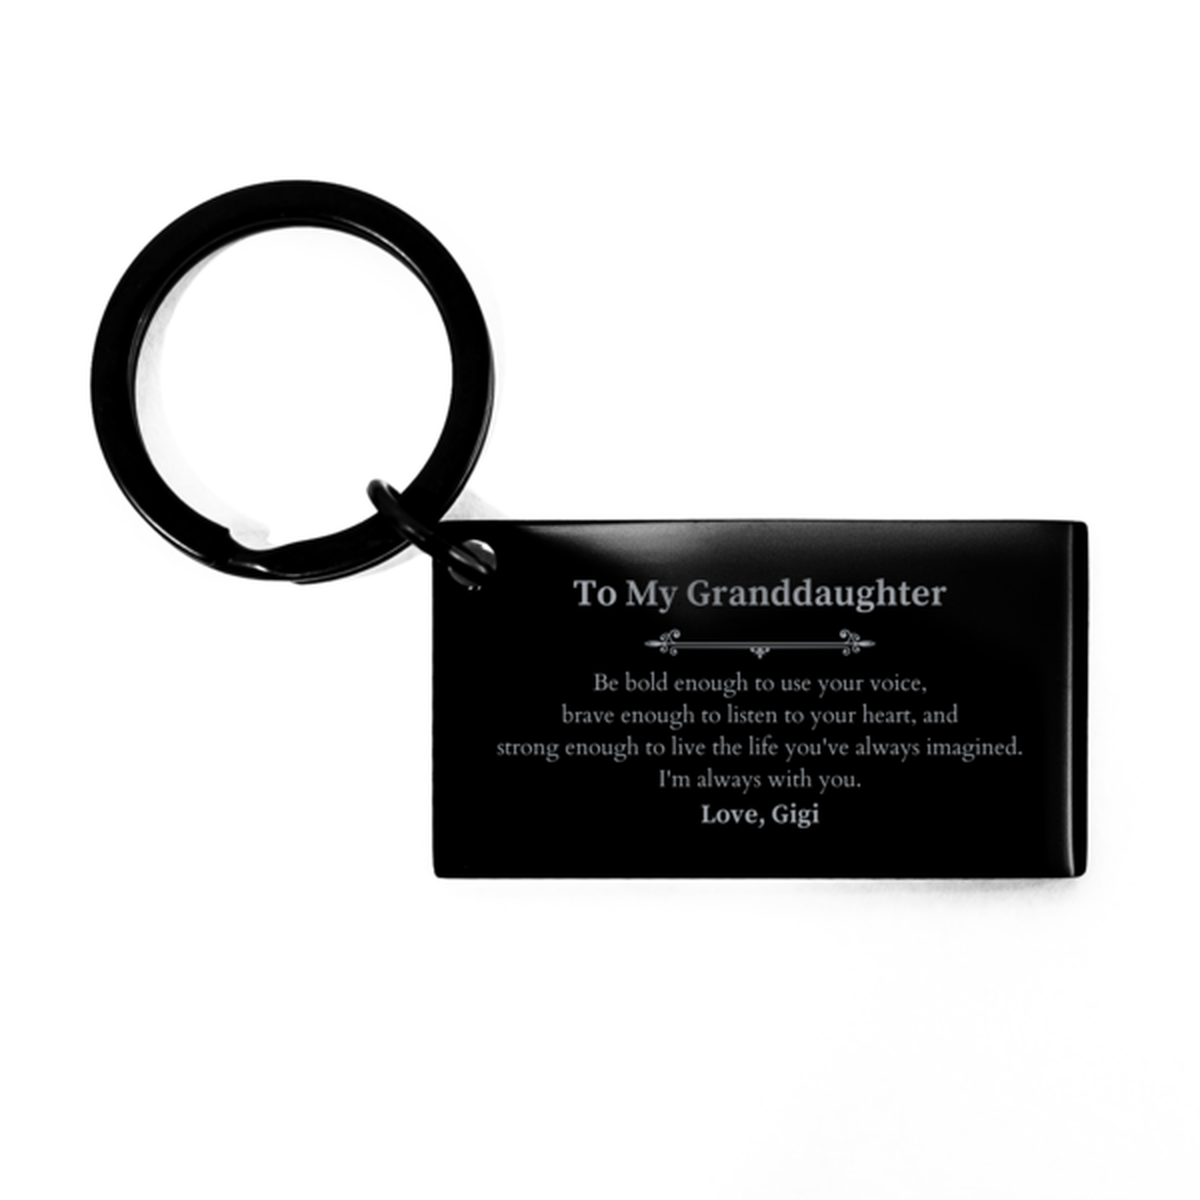 Keepsake Granddaughter Keychain Gift Idea Graduation Christmas Birthday Granddaughter from Gigi, Granddaughter Be bold enough to use your voice, brave enough to listen to your heart. Love, Gigi